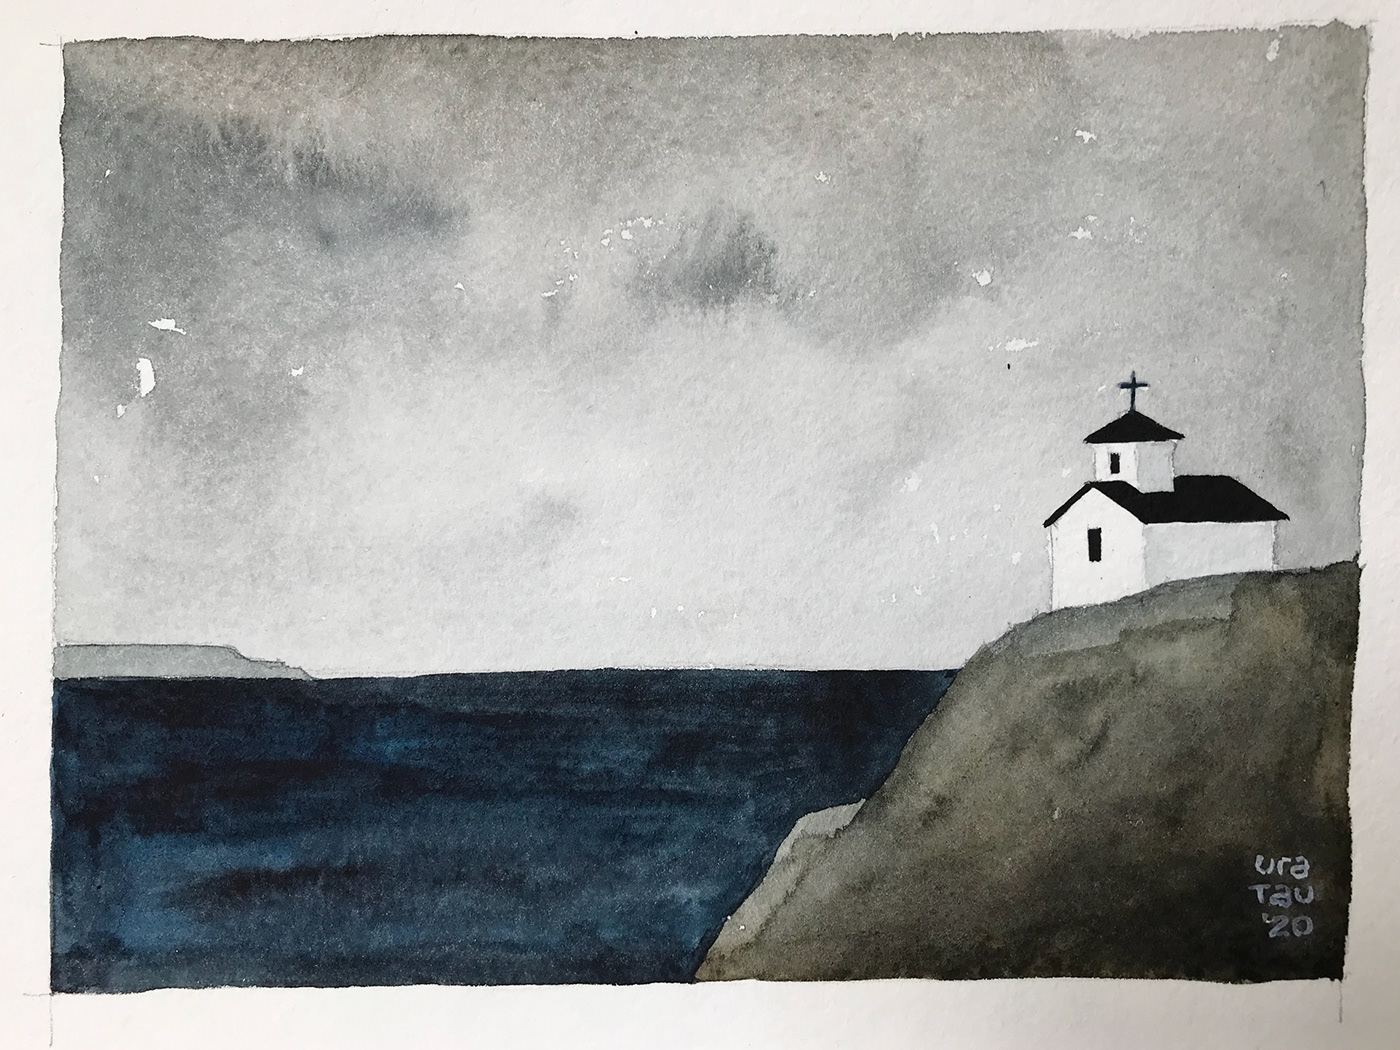 art cape Drawing  Finearts lighthouse nordic Norge Ocean painting   rock Scandinavia sea stone watercolor